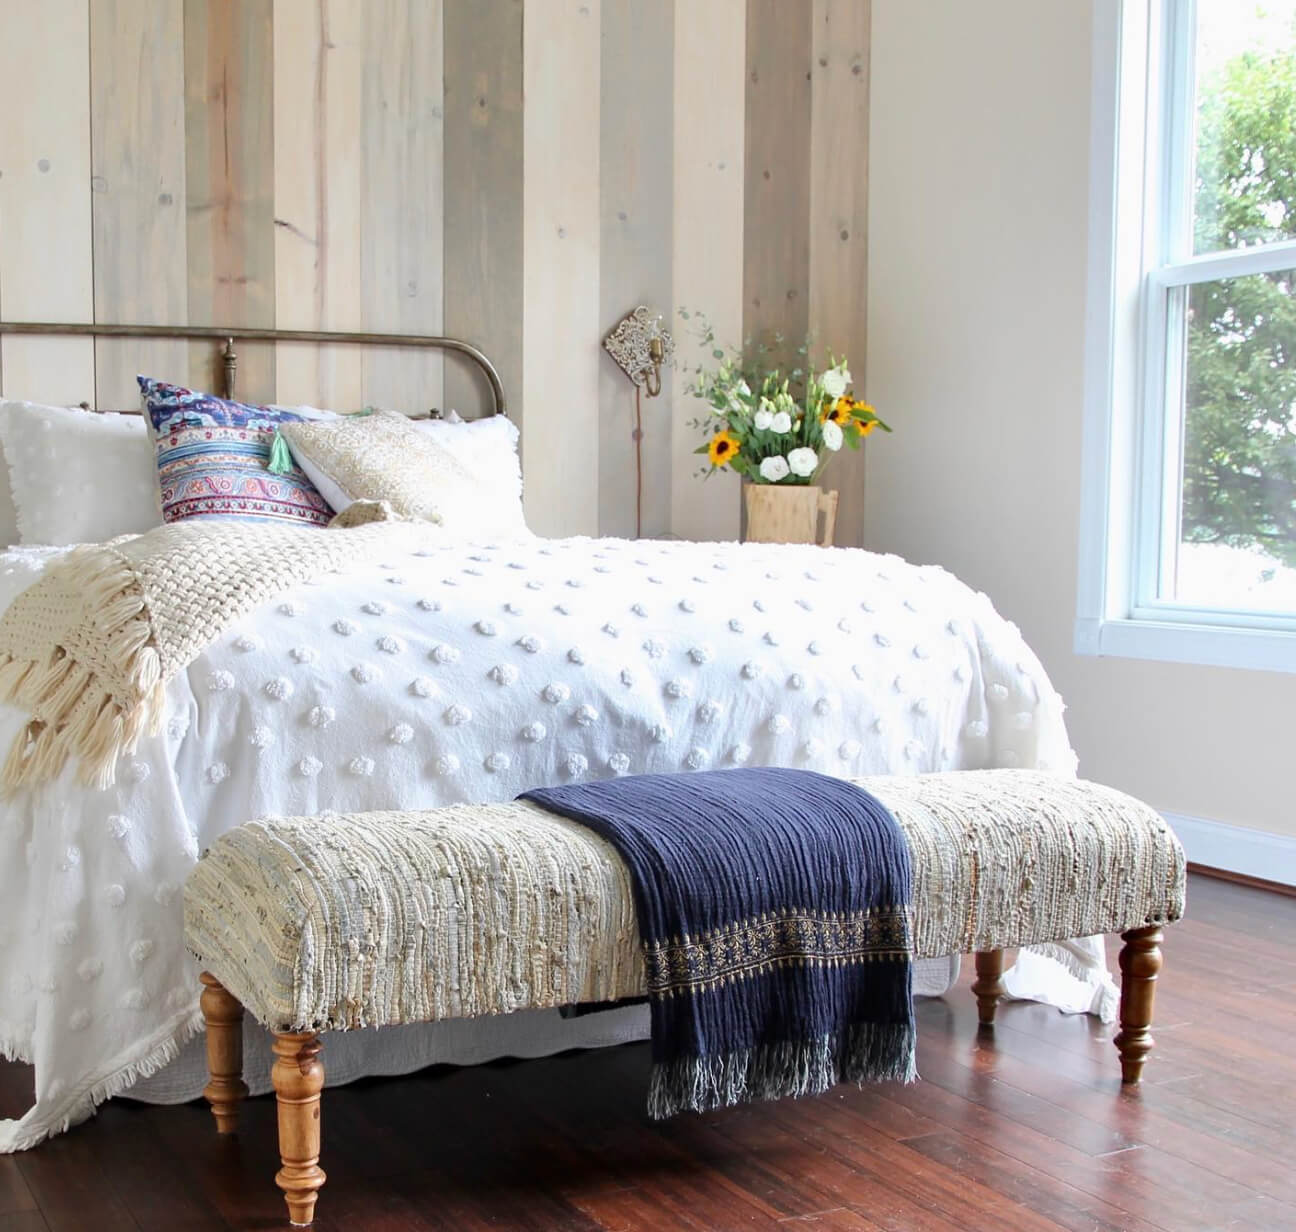 Wood wall with a vintage bed frame in a cottagecore bedroom.